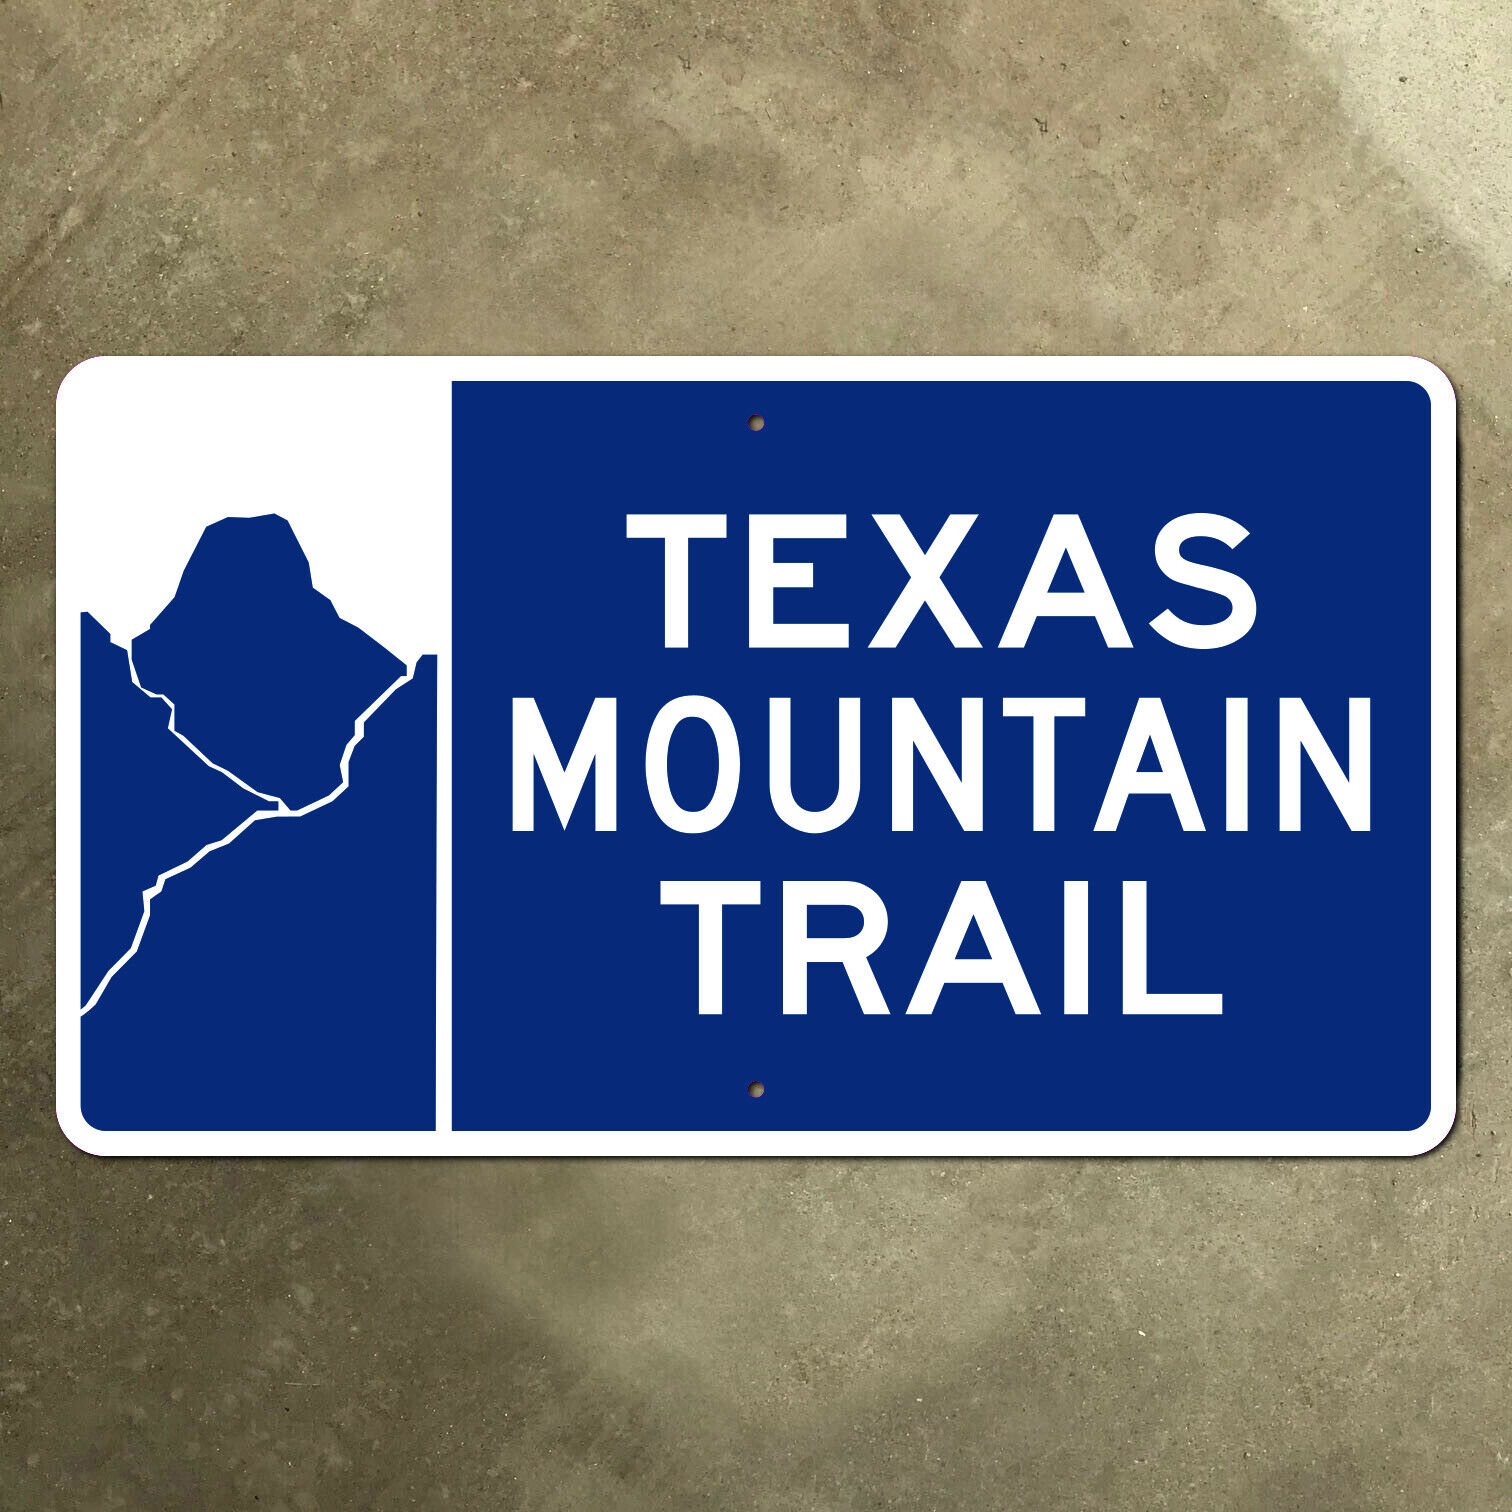 Texas Mountain Trail highway road sign scenic route Heritage 1998 14x8